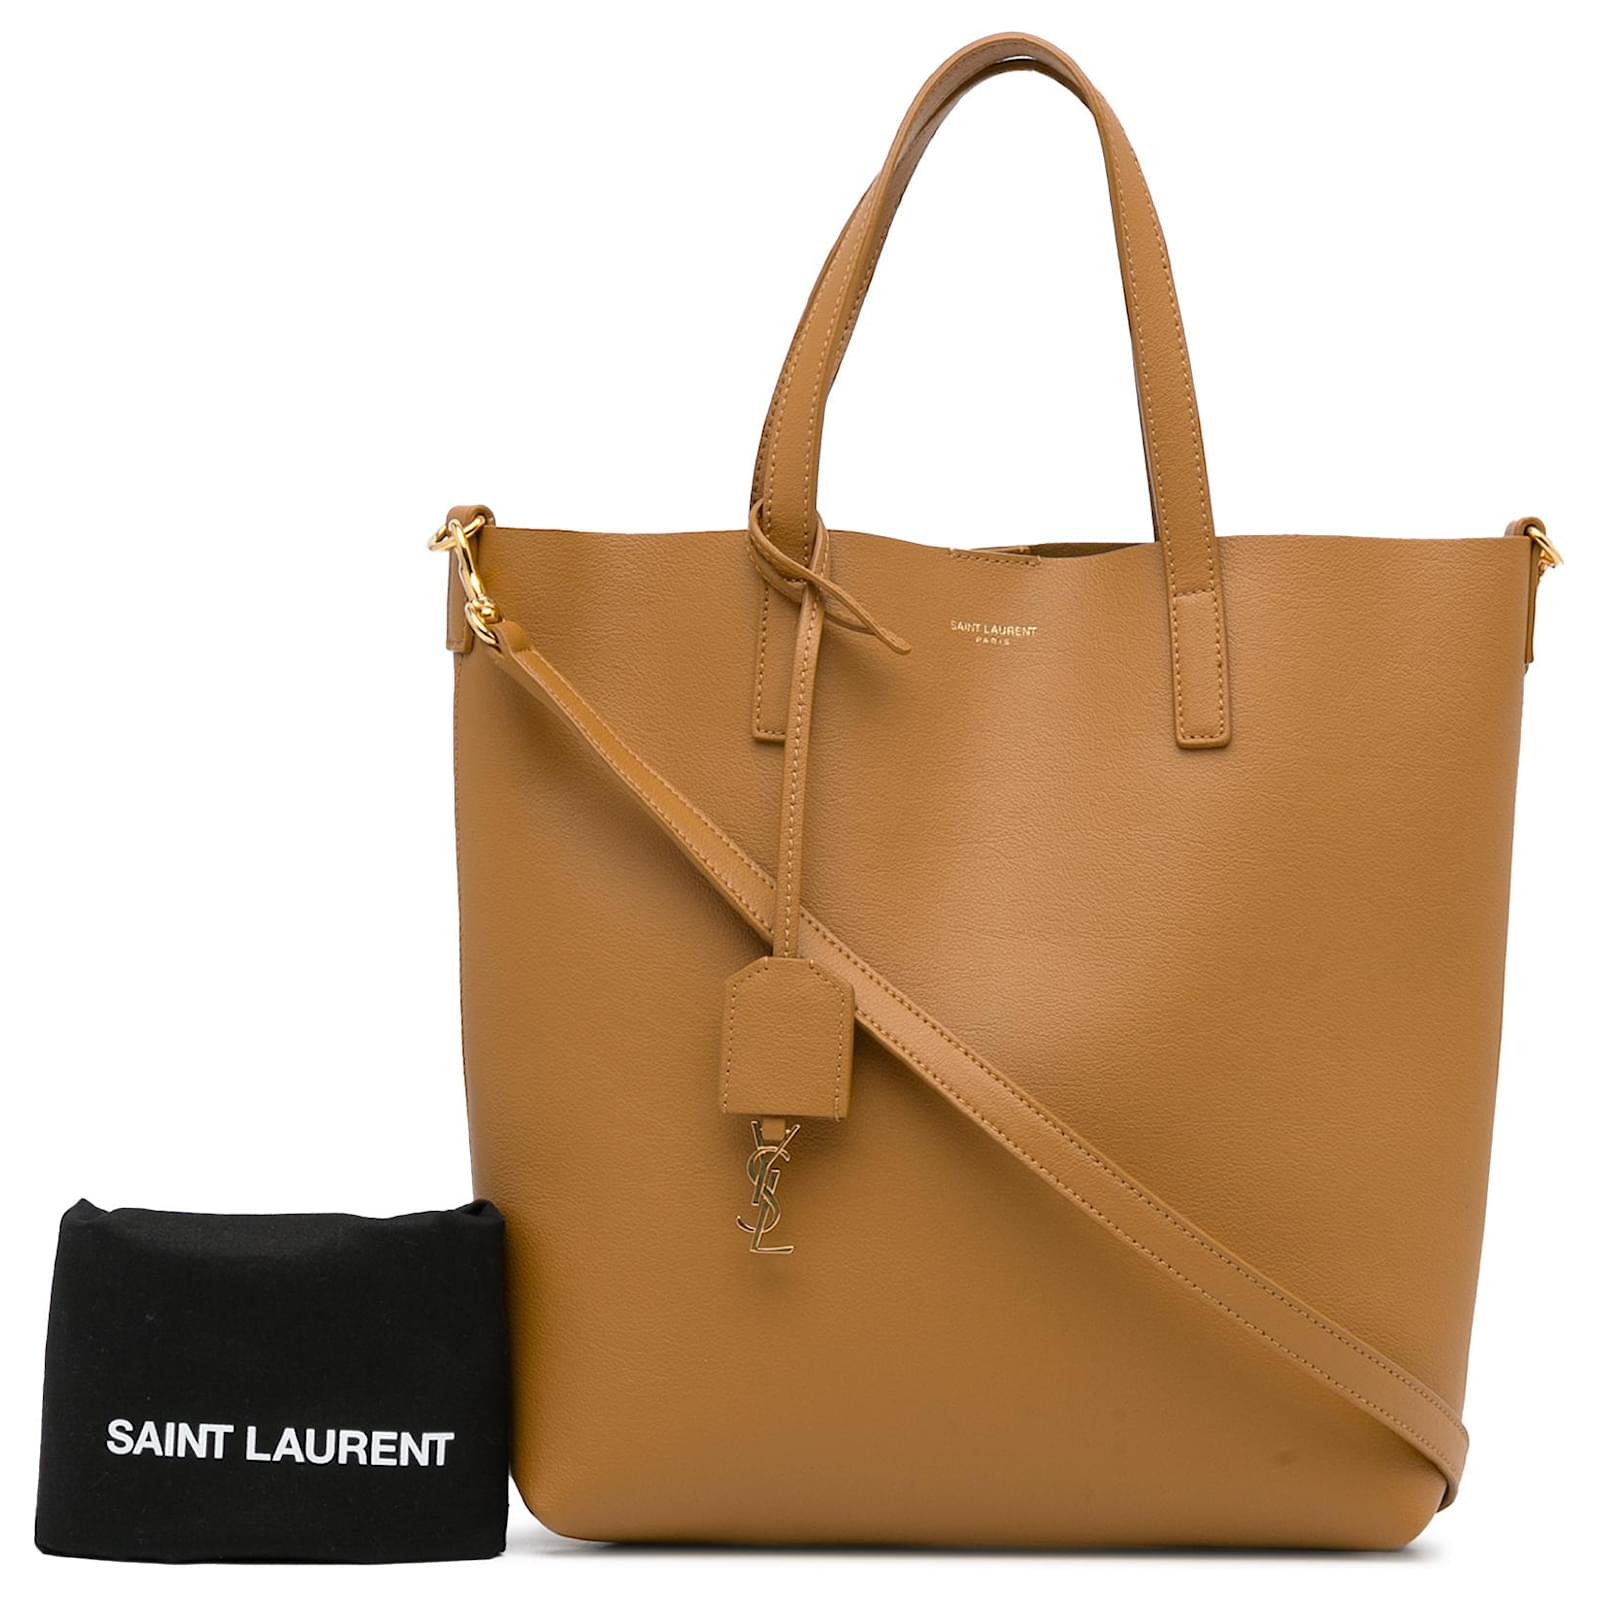 North South Toy Tote, SAINT LAURENT